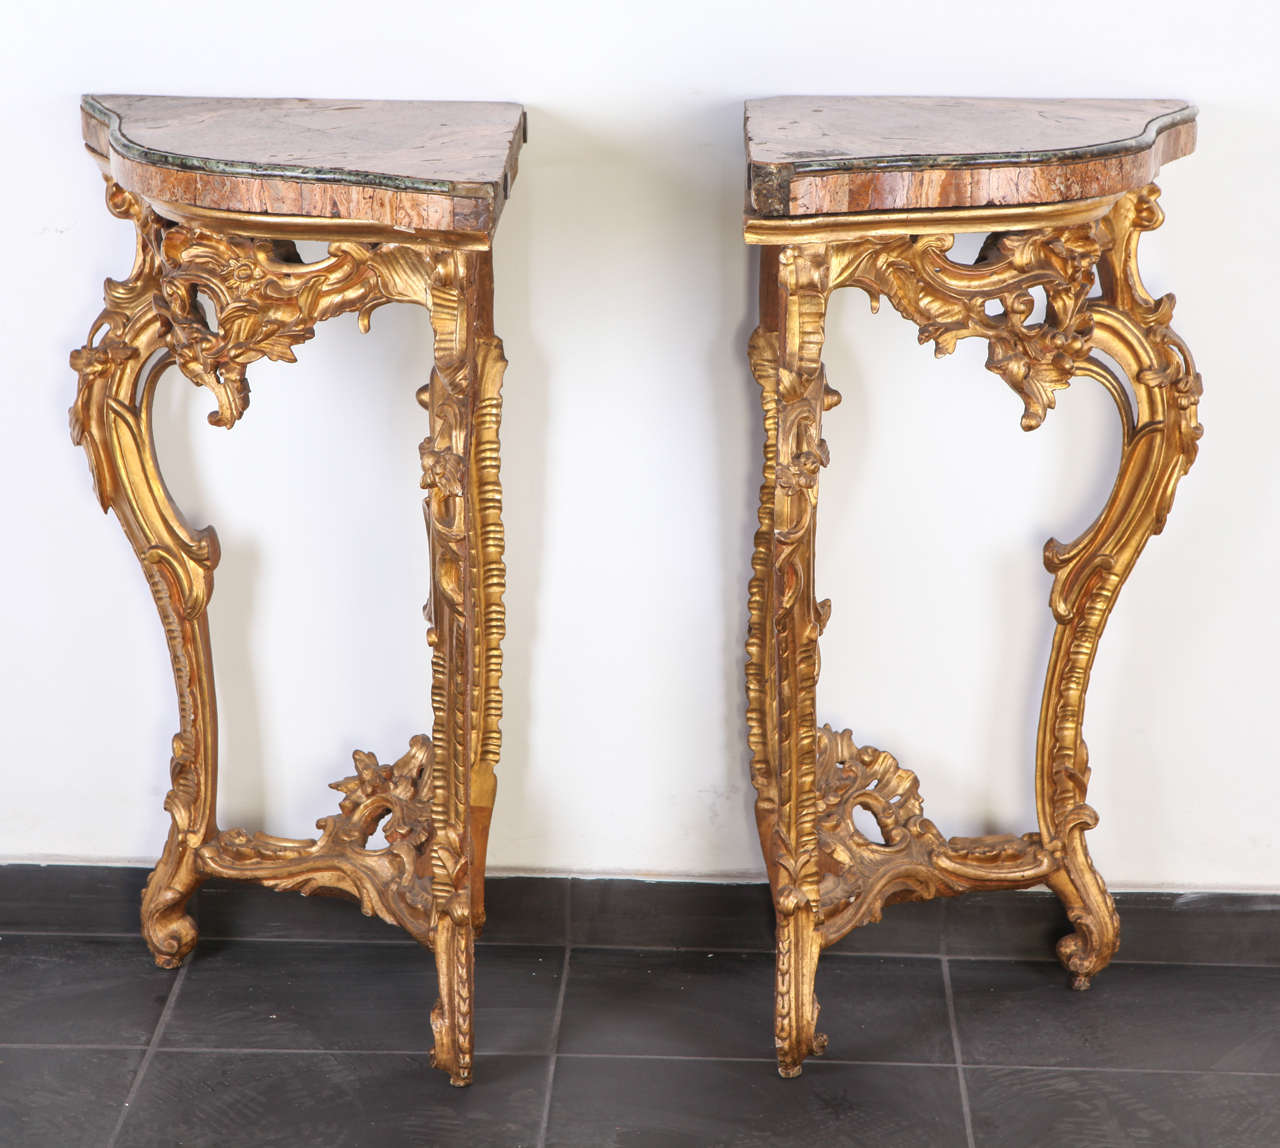 18th Century Italian alabaster topped giltwood pair of corner console tables, Rococo style.